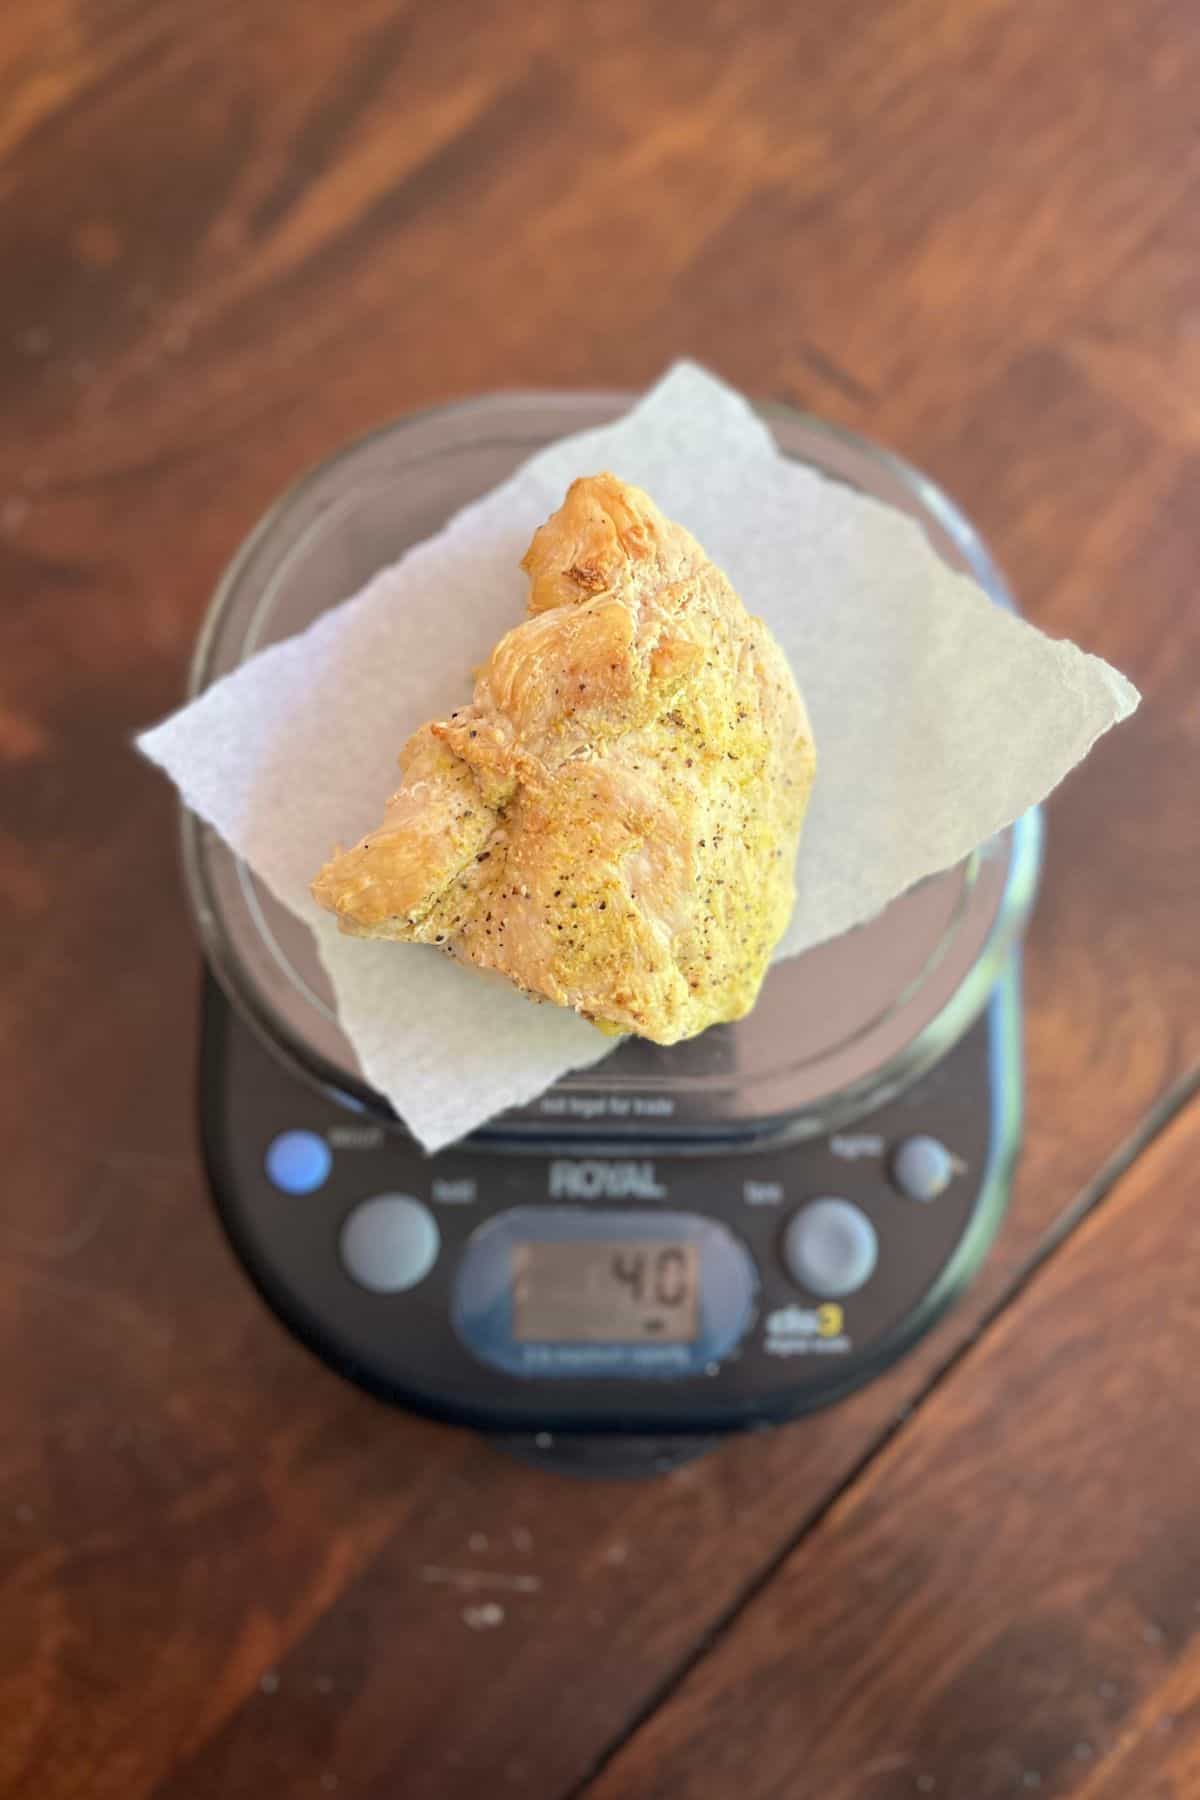 cooked chicken on a kitchen scale